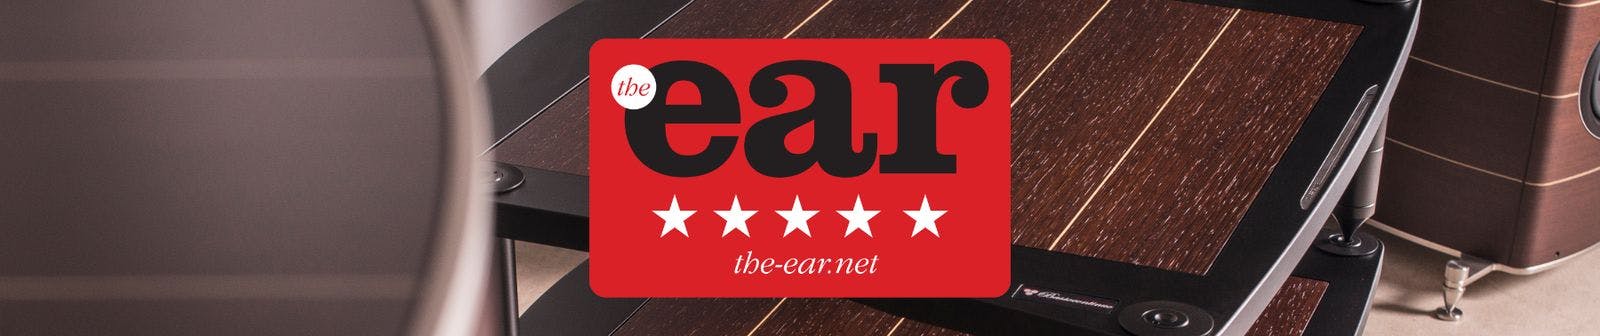 The ear basso review 1